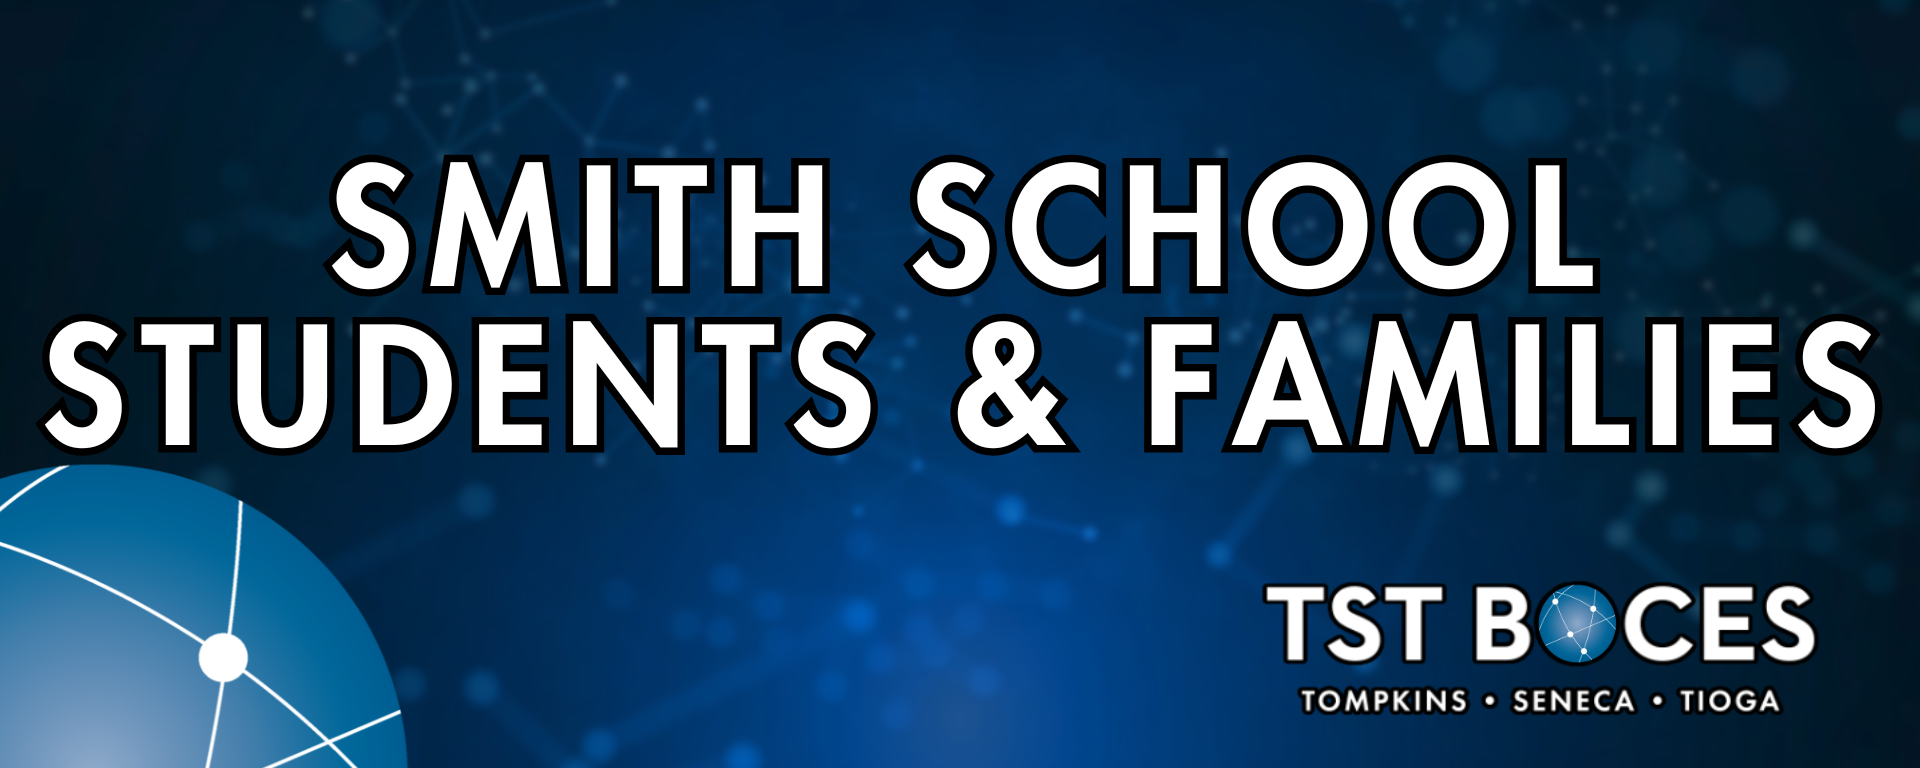 Smith school students and parents